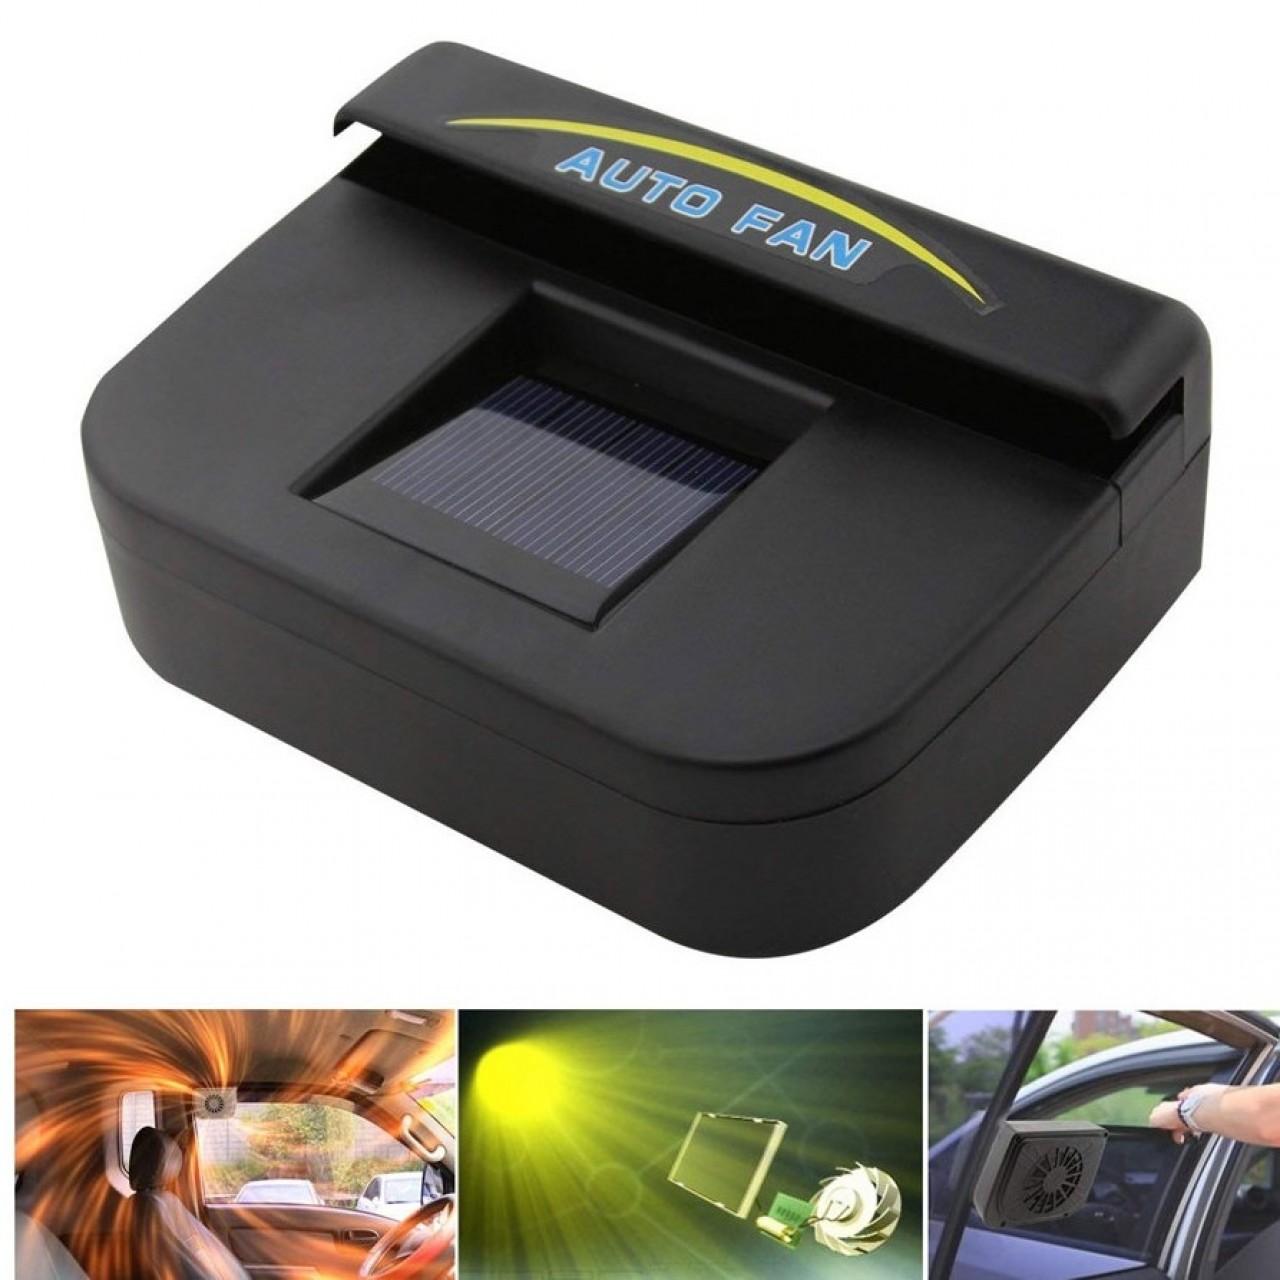 Car Auto Air Vent Cooling Fan System Powered